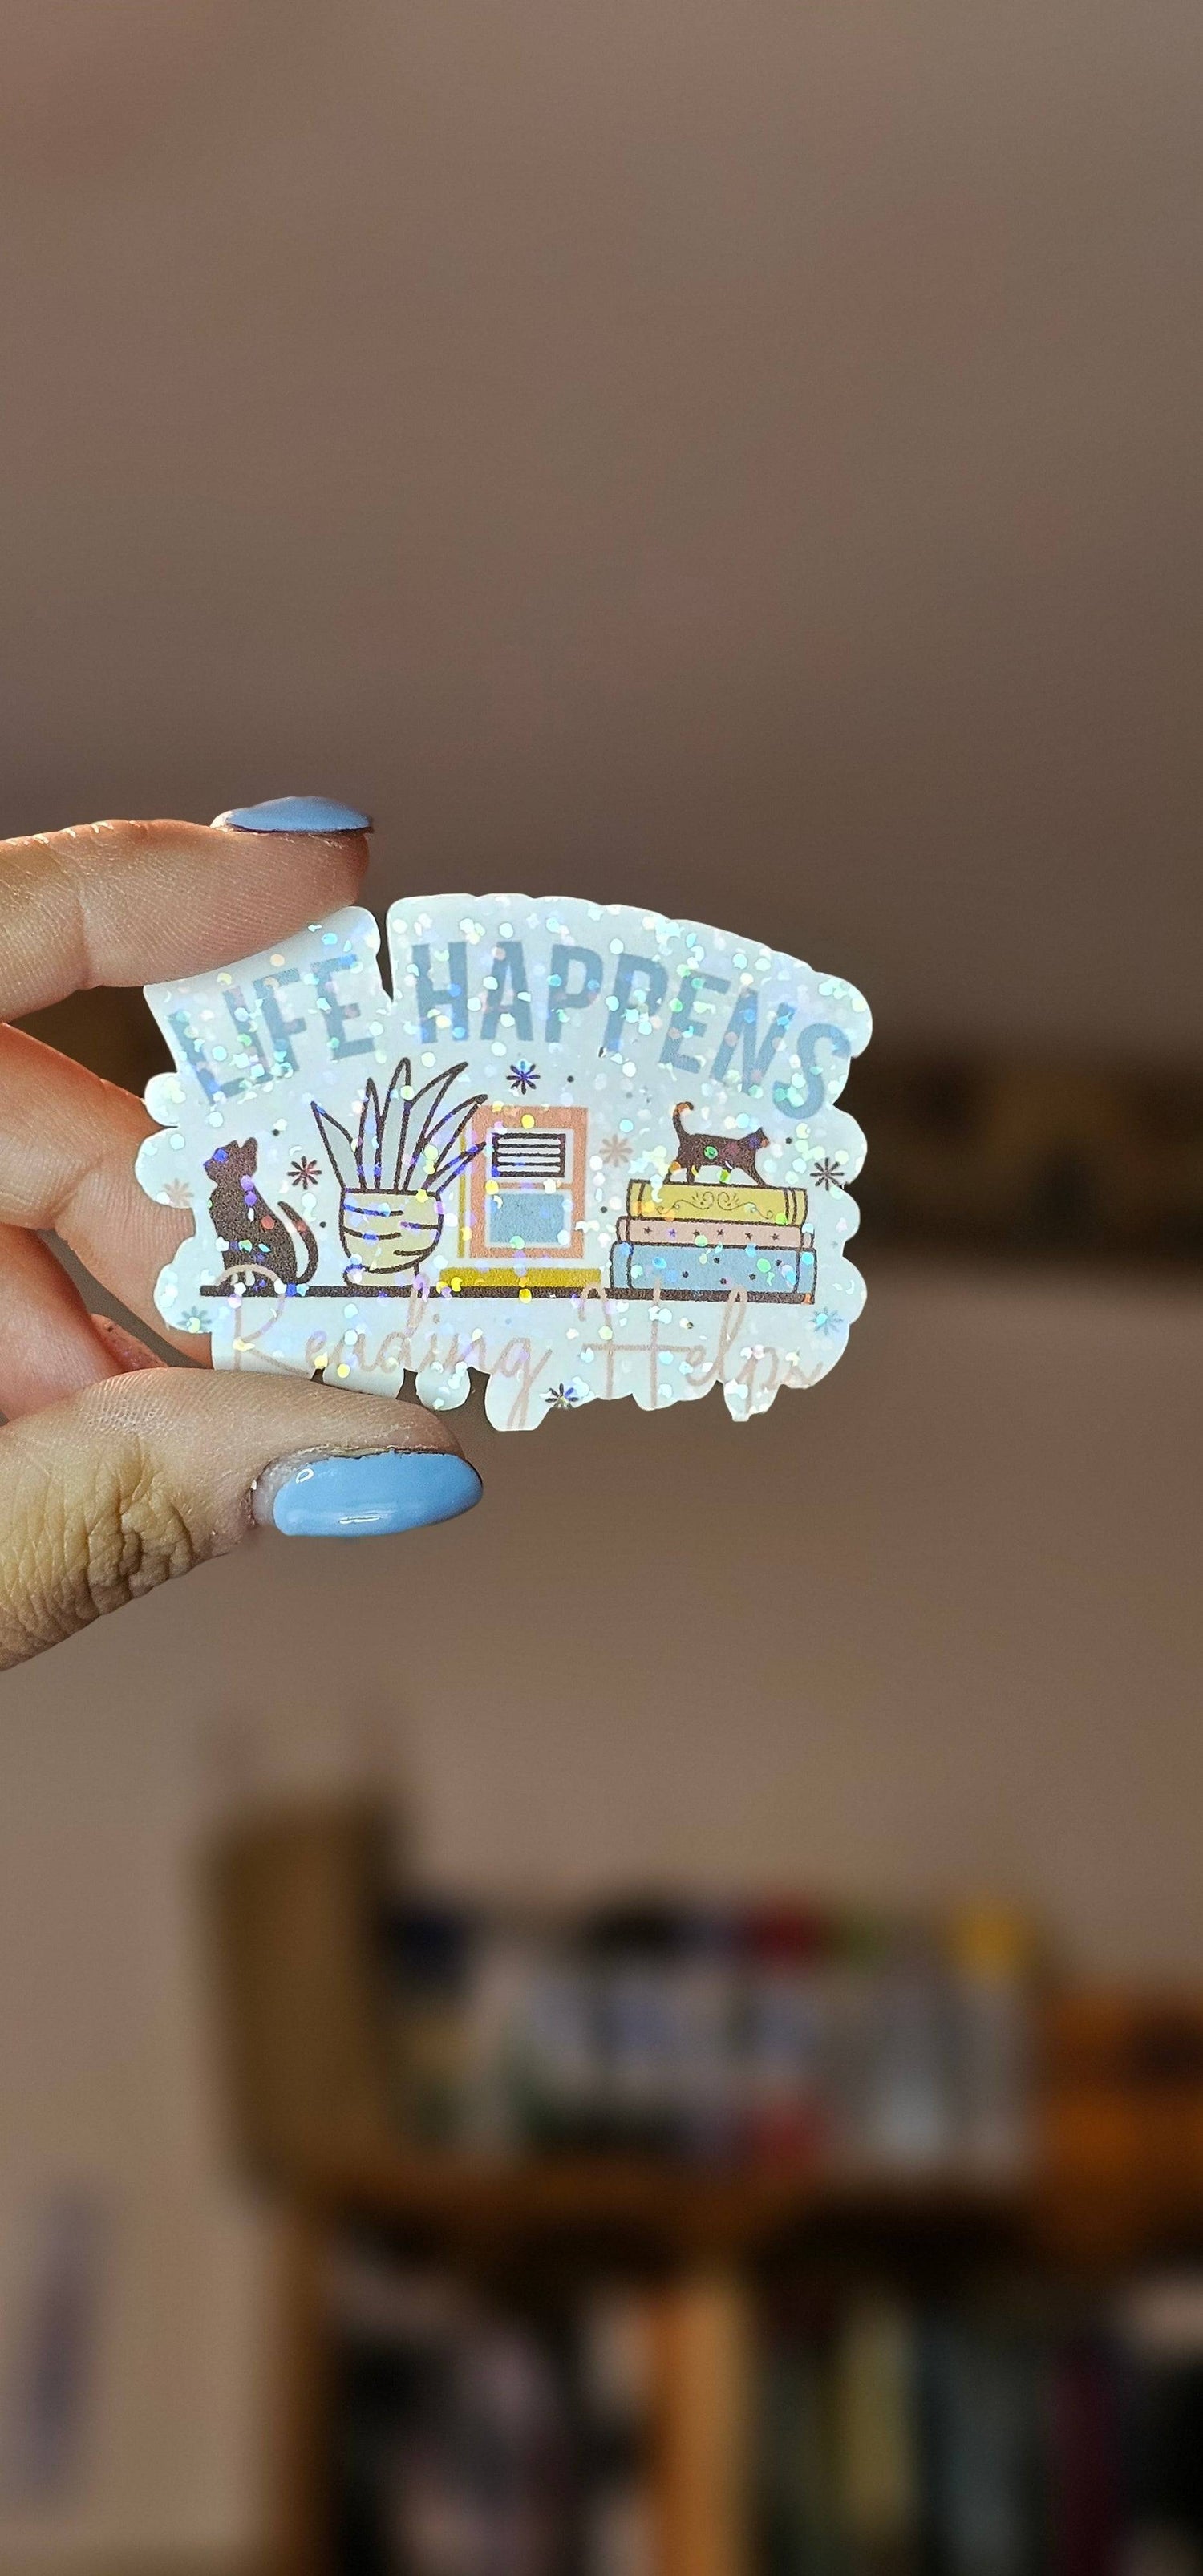 Life Happens Sticker - Busy Housesteaders Boutique 